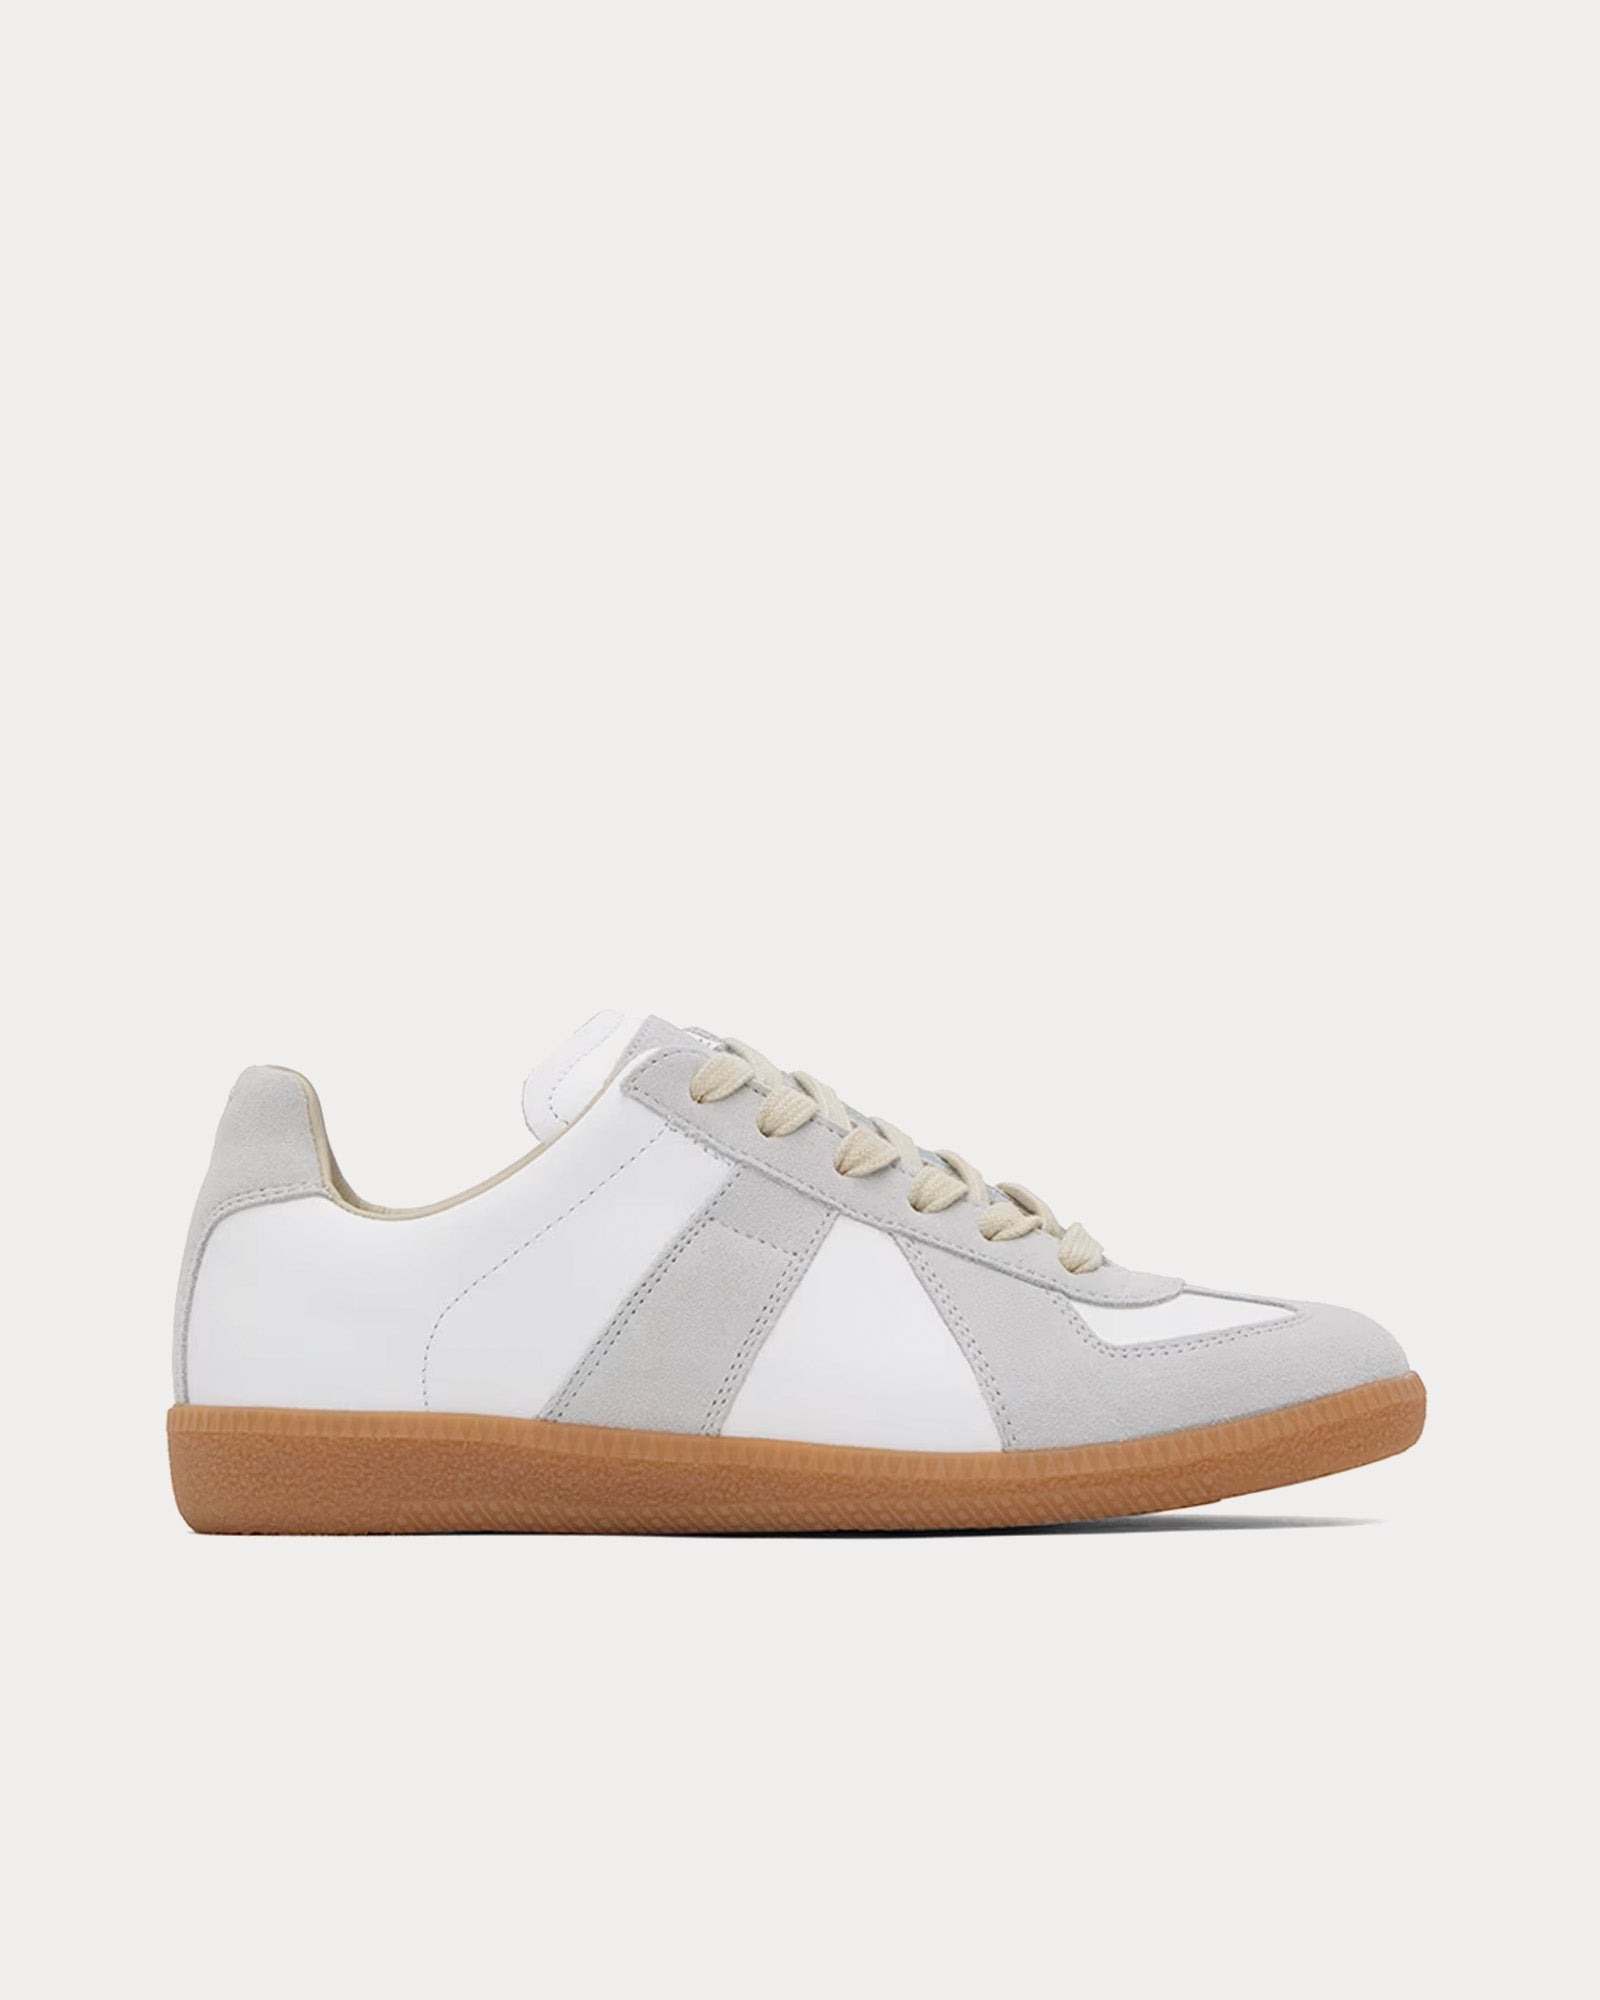 Maison Margiela - Replica Leather Dirty White Low Top Sneakers